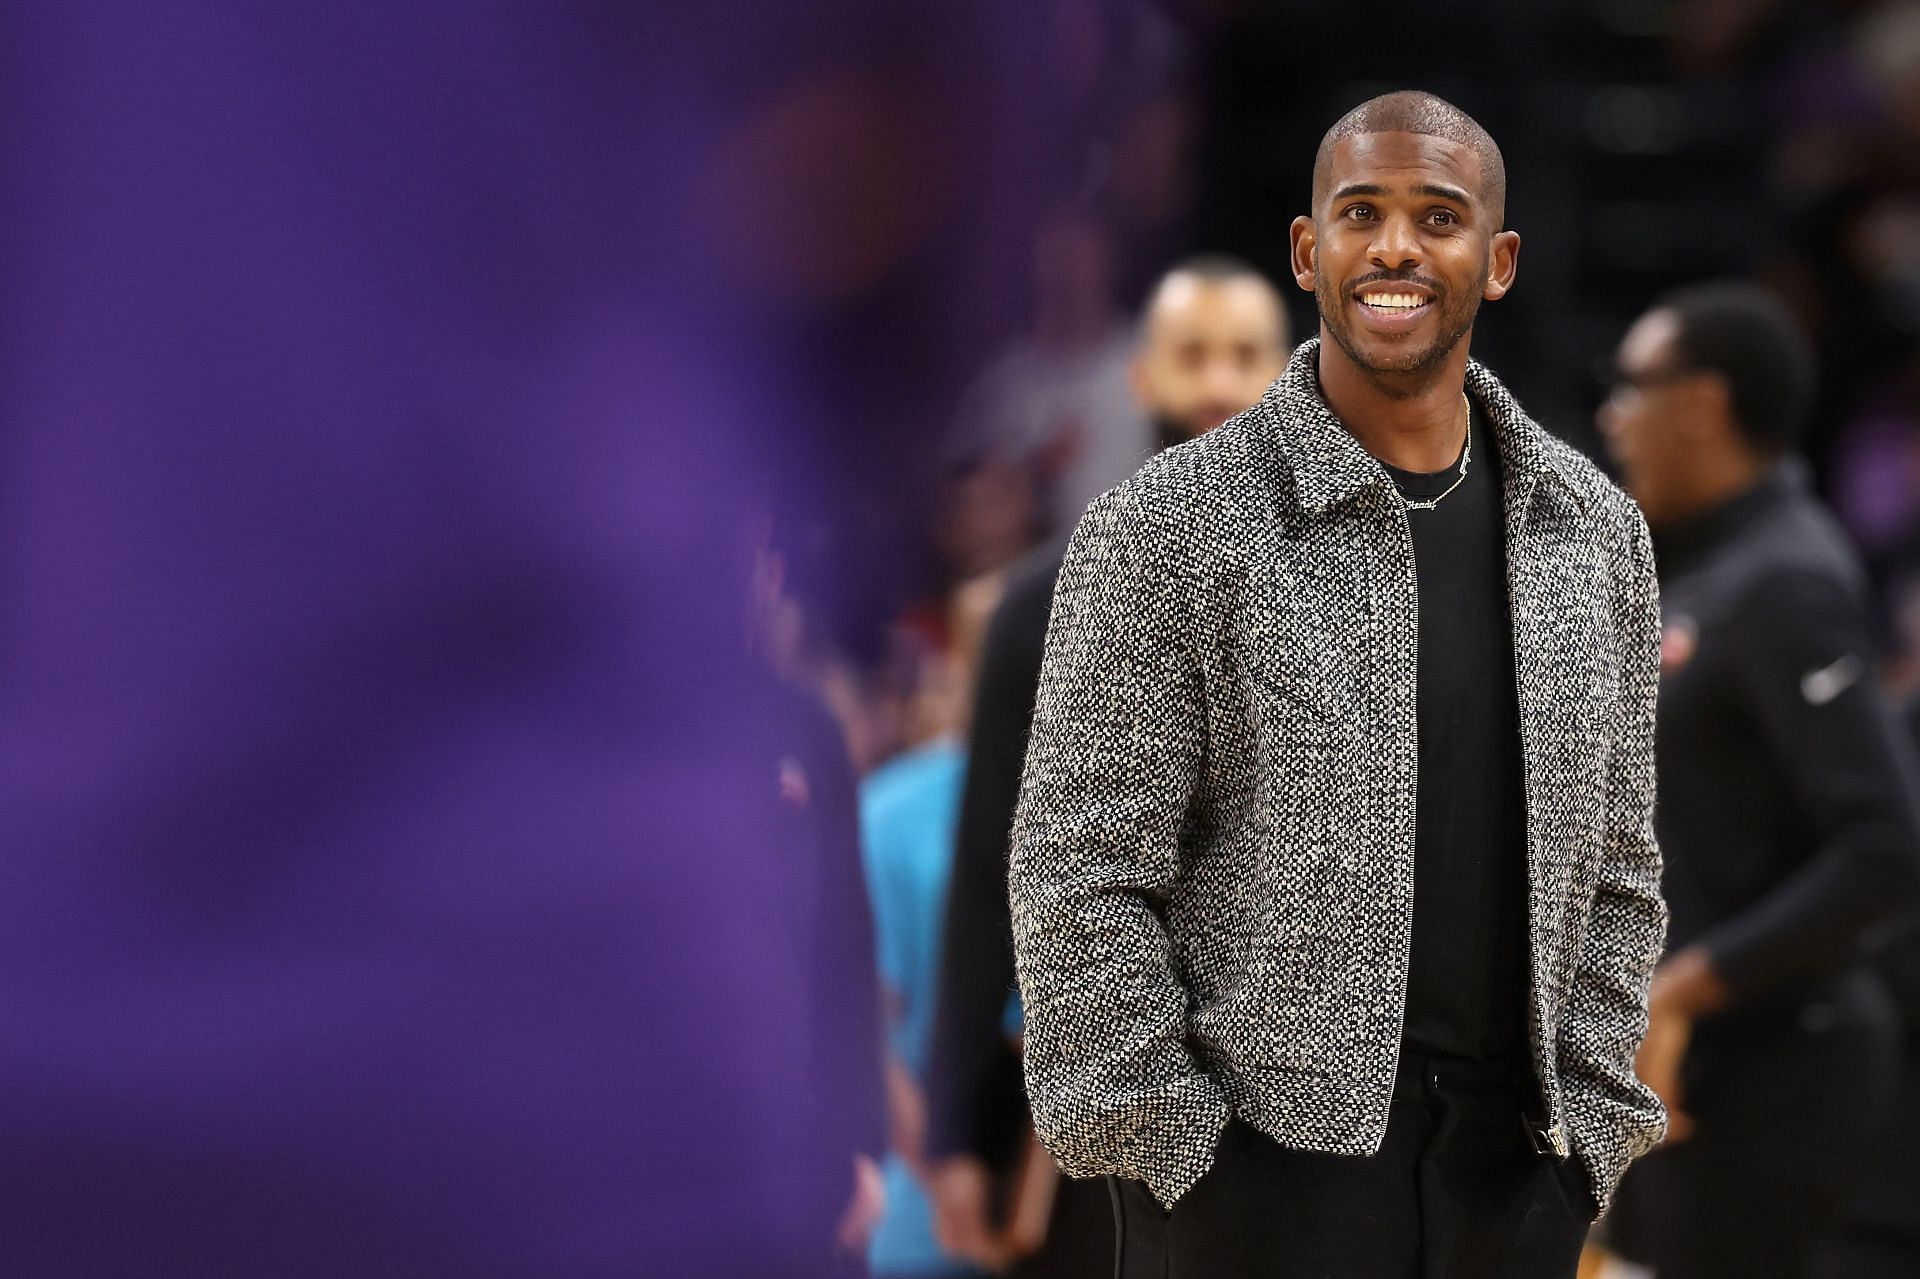 Chris Paul is in the limelight for the wrong reason.